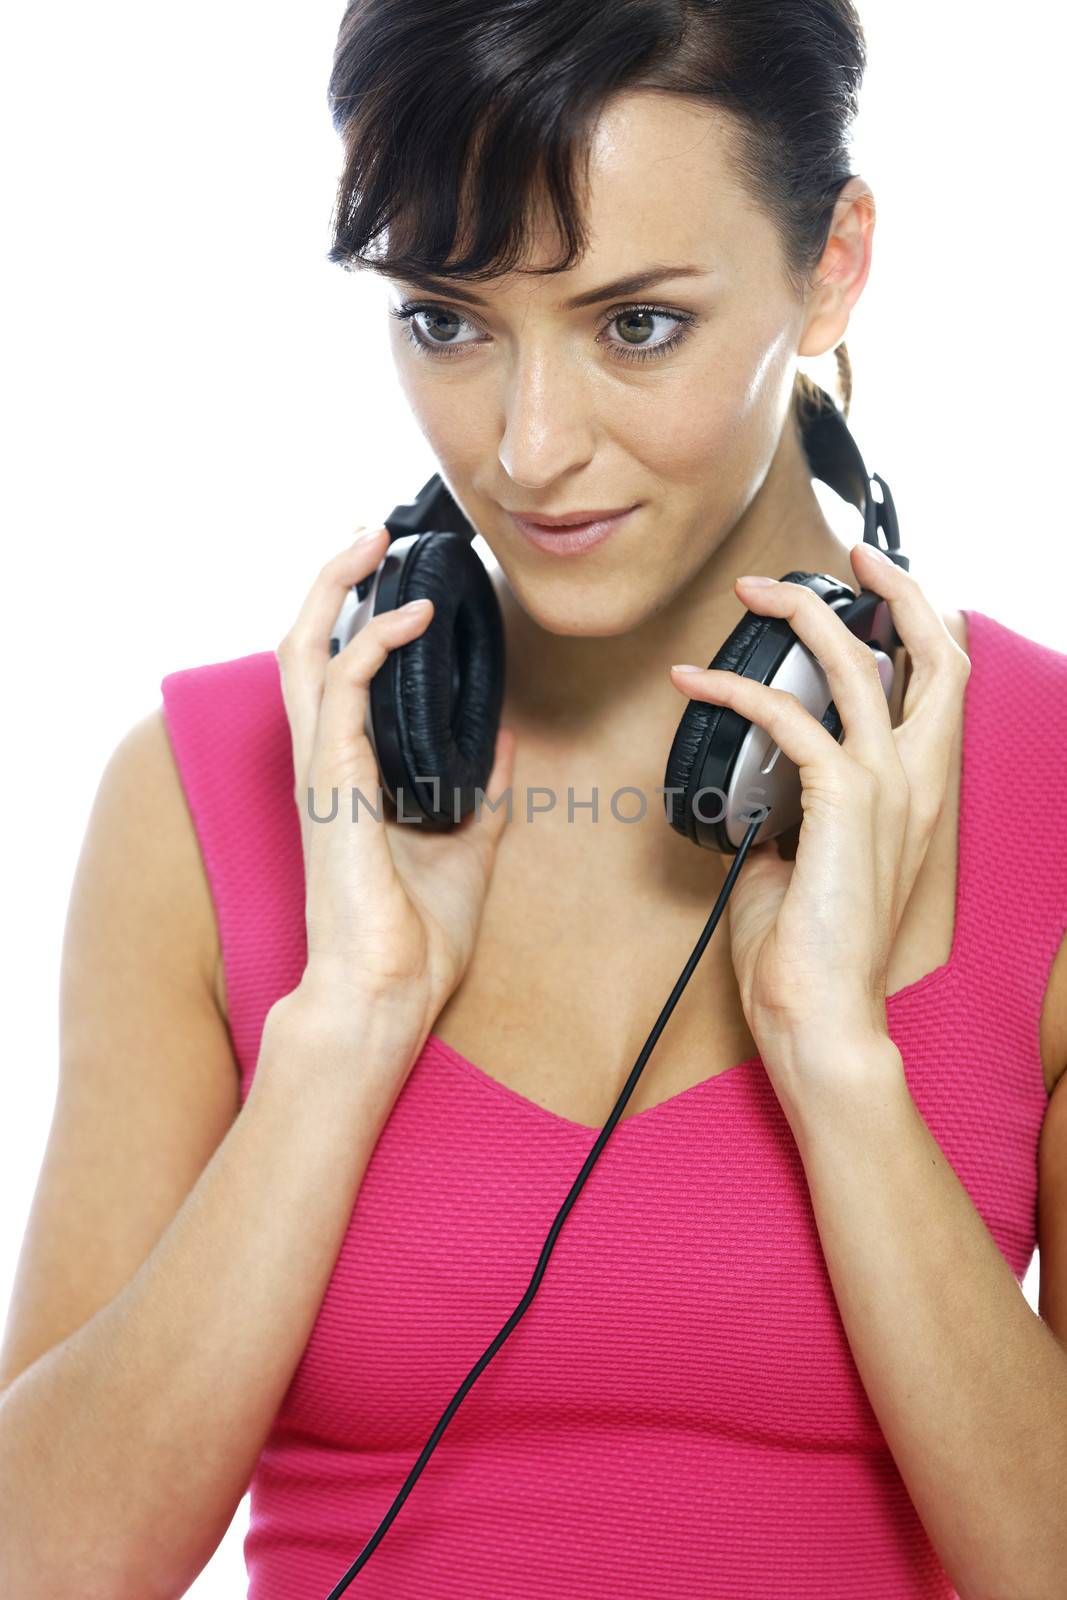 Young woman listening to music on her headphones.